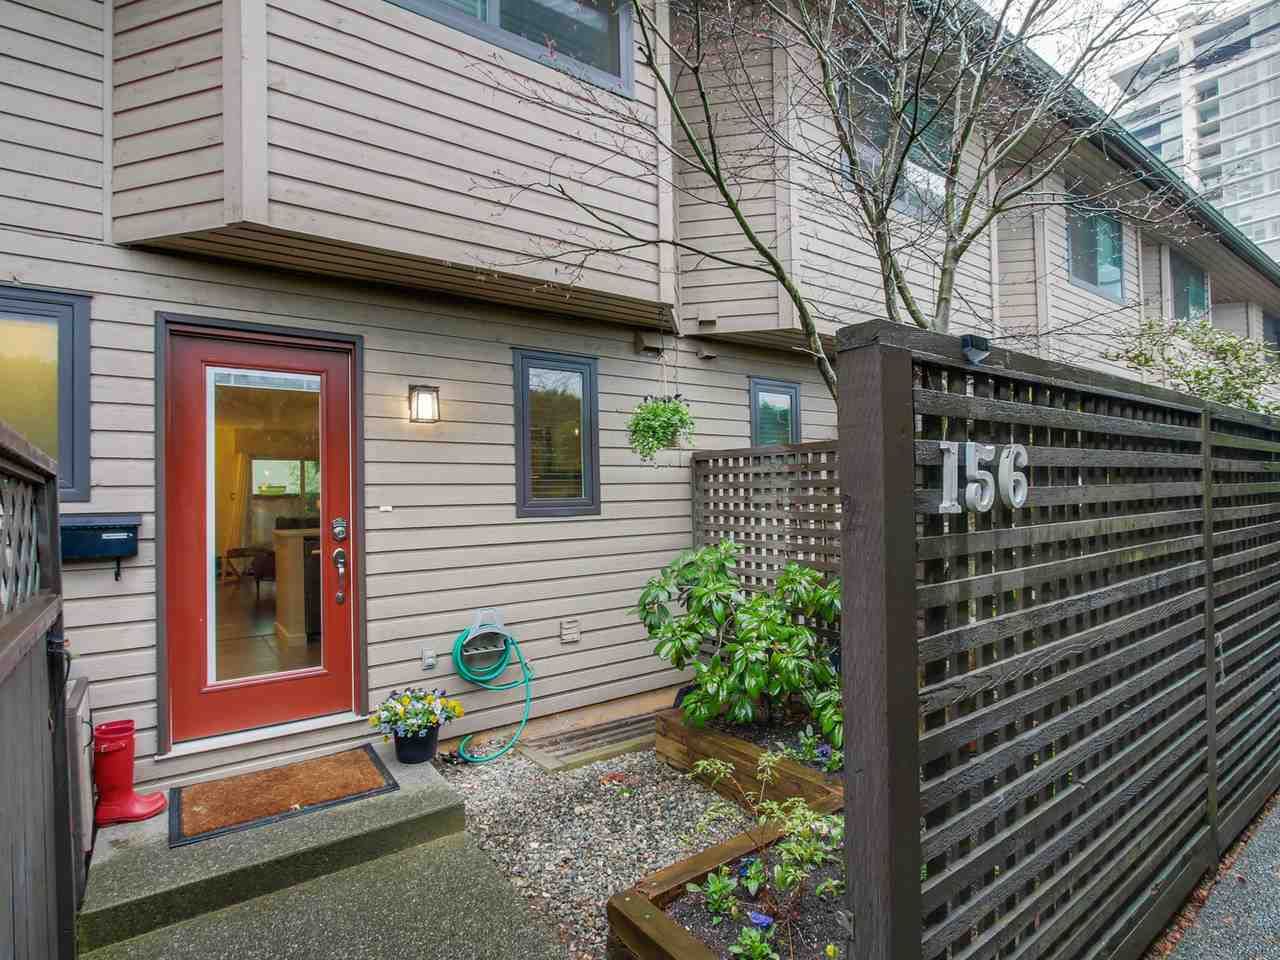 Main Photo: 156 W 12TH STREET in : Central Lonsdale Townhouse for sale : MLS®# R2049485